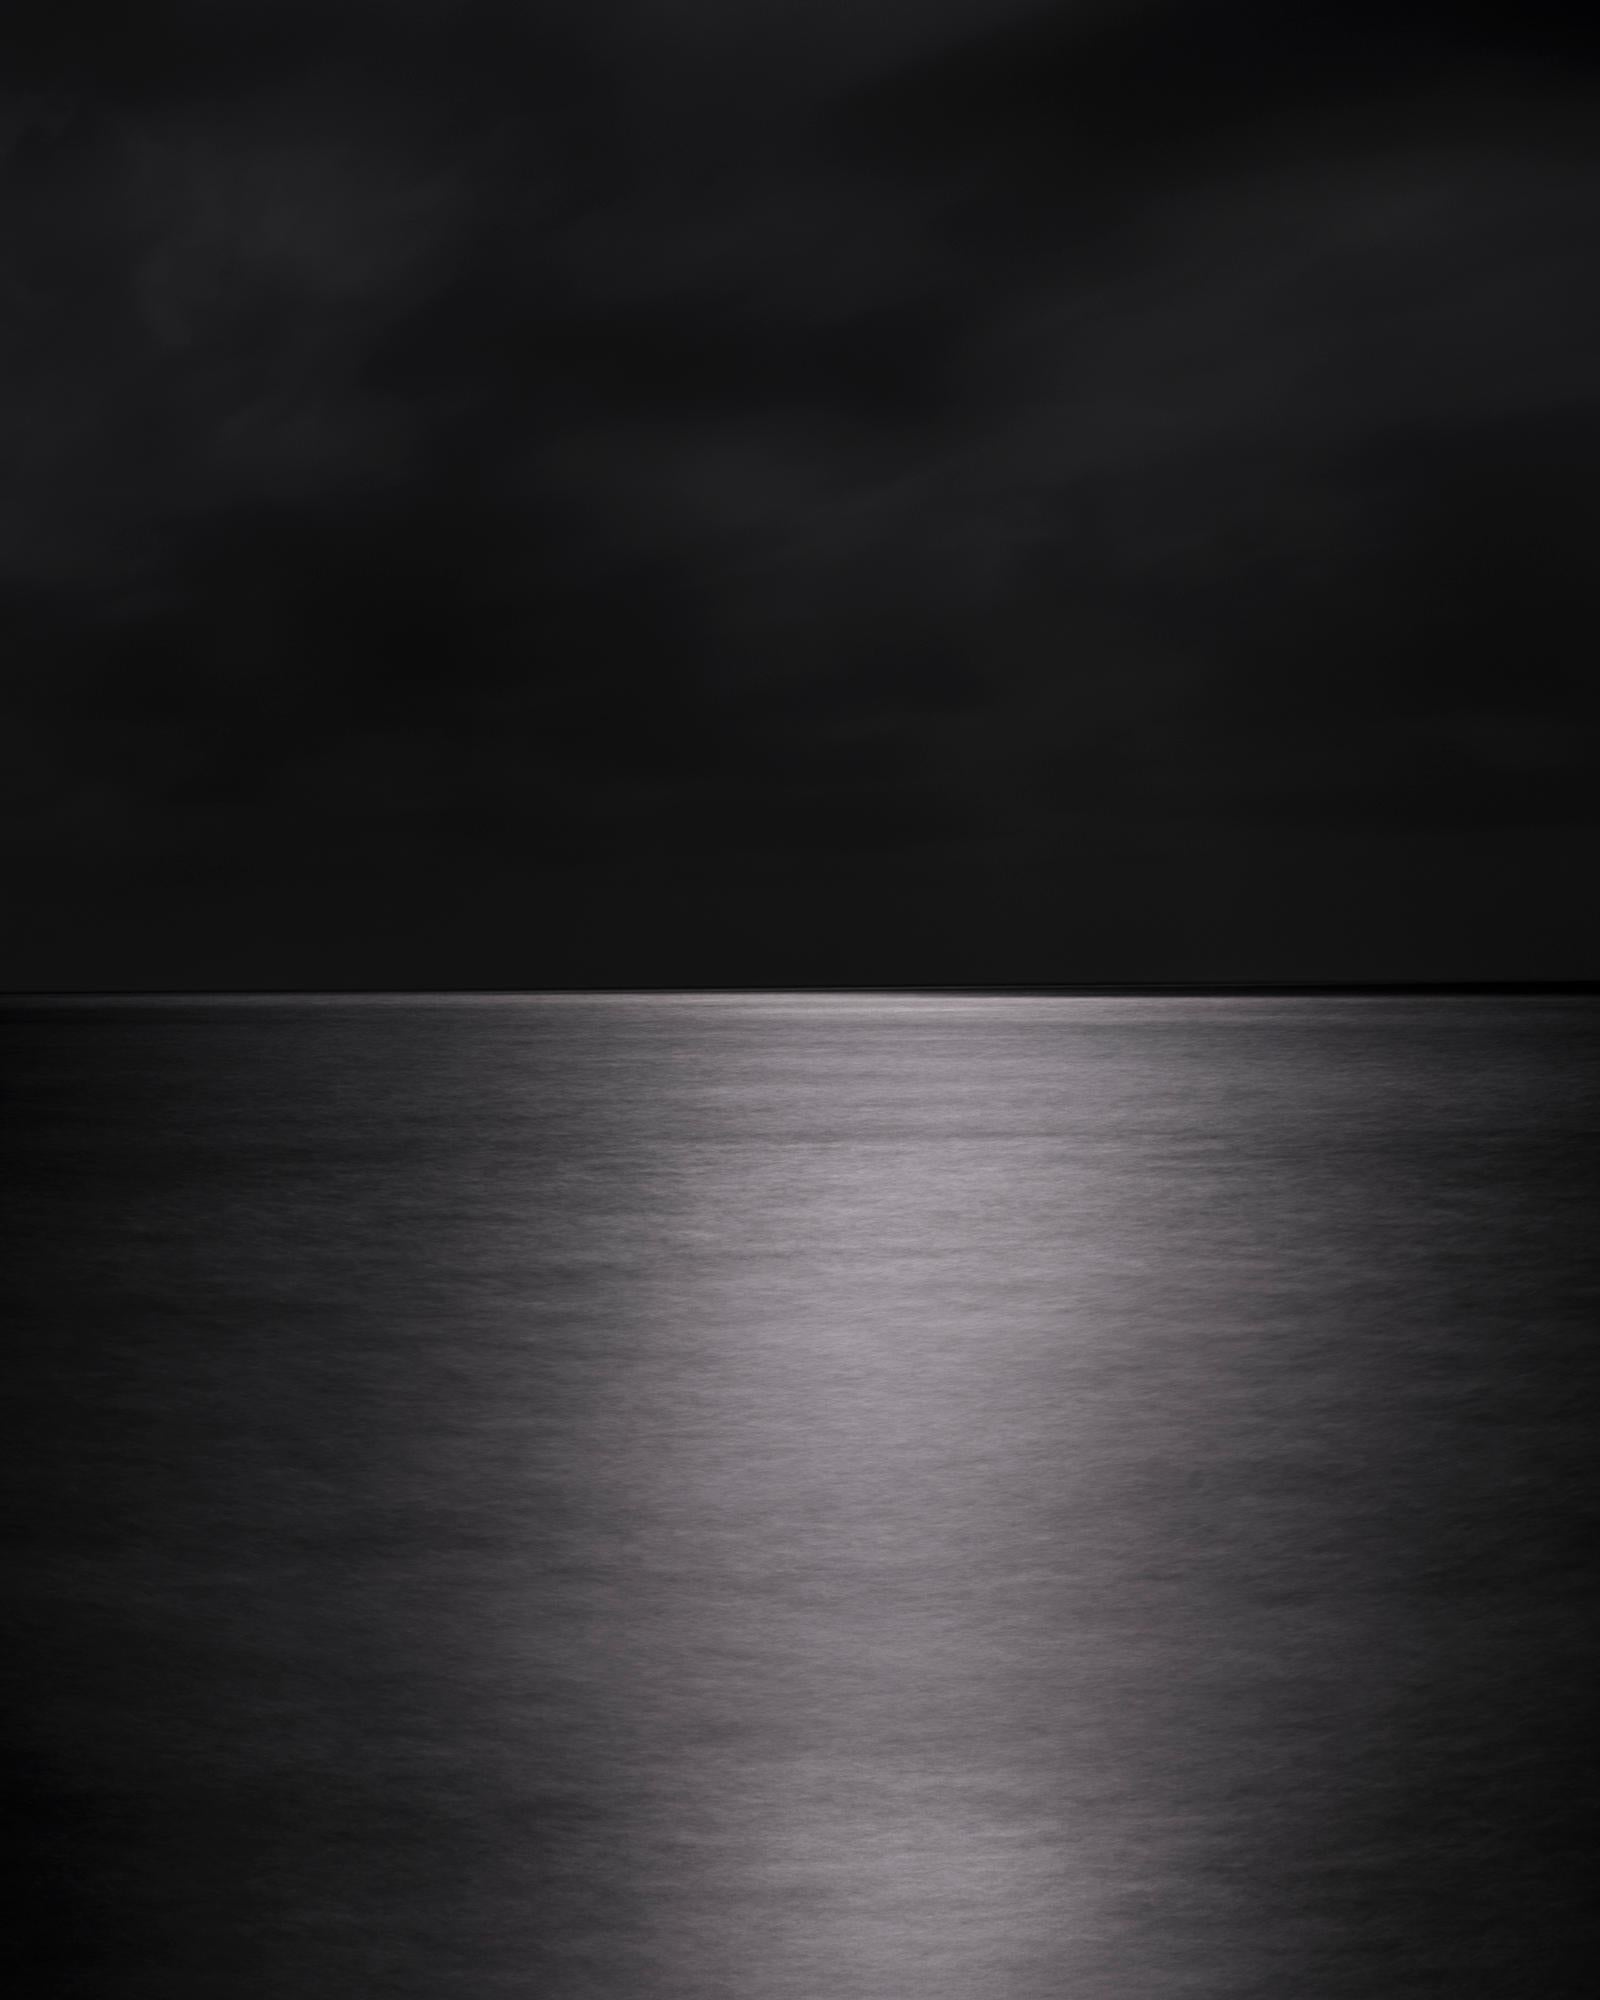 Moonrise III, II and I. Triptych, 2023 by Miguel Winograd 
From the Series Mares
Archival pigment print on fine art paper
Overall size: 43 in H x 108 in W 
Individual Size: 43 in H x 36 in W 
Edition of 7 + 2AP
Unframed